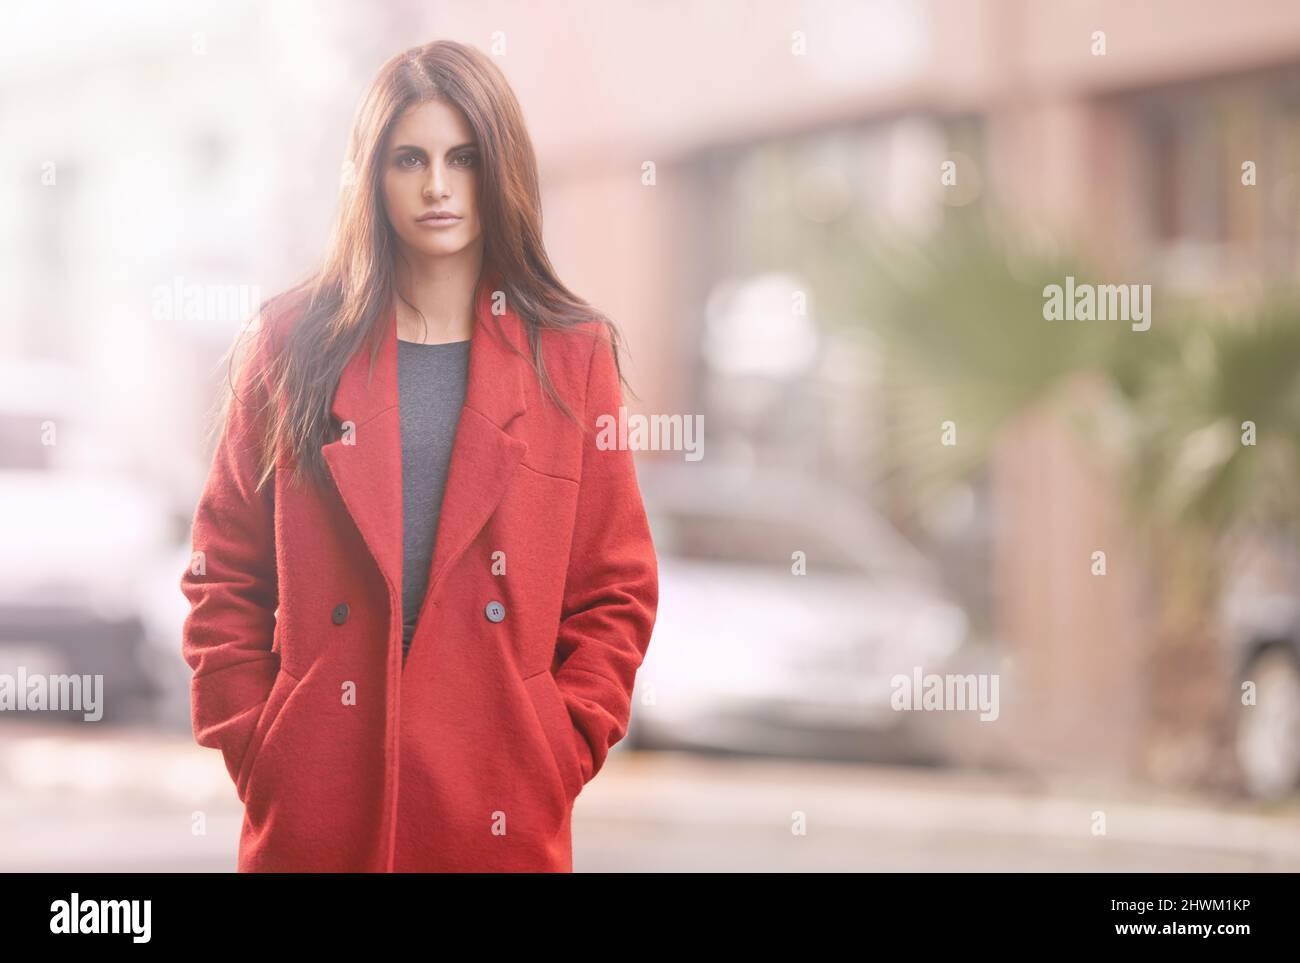 Look fab this fall. Portrait of a gorgeous young woman in a red winter coat standing in an urban setting. Stock Photo